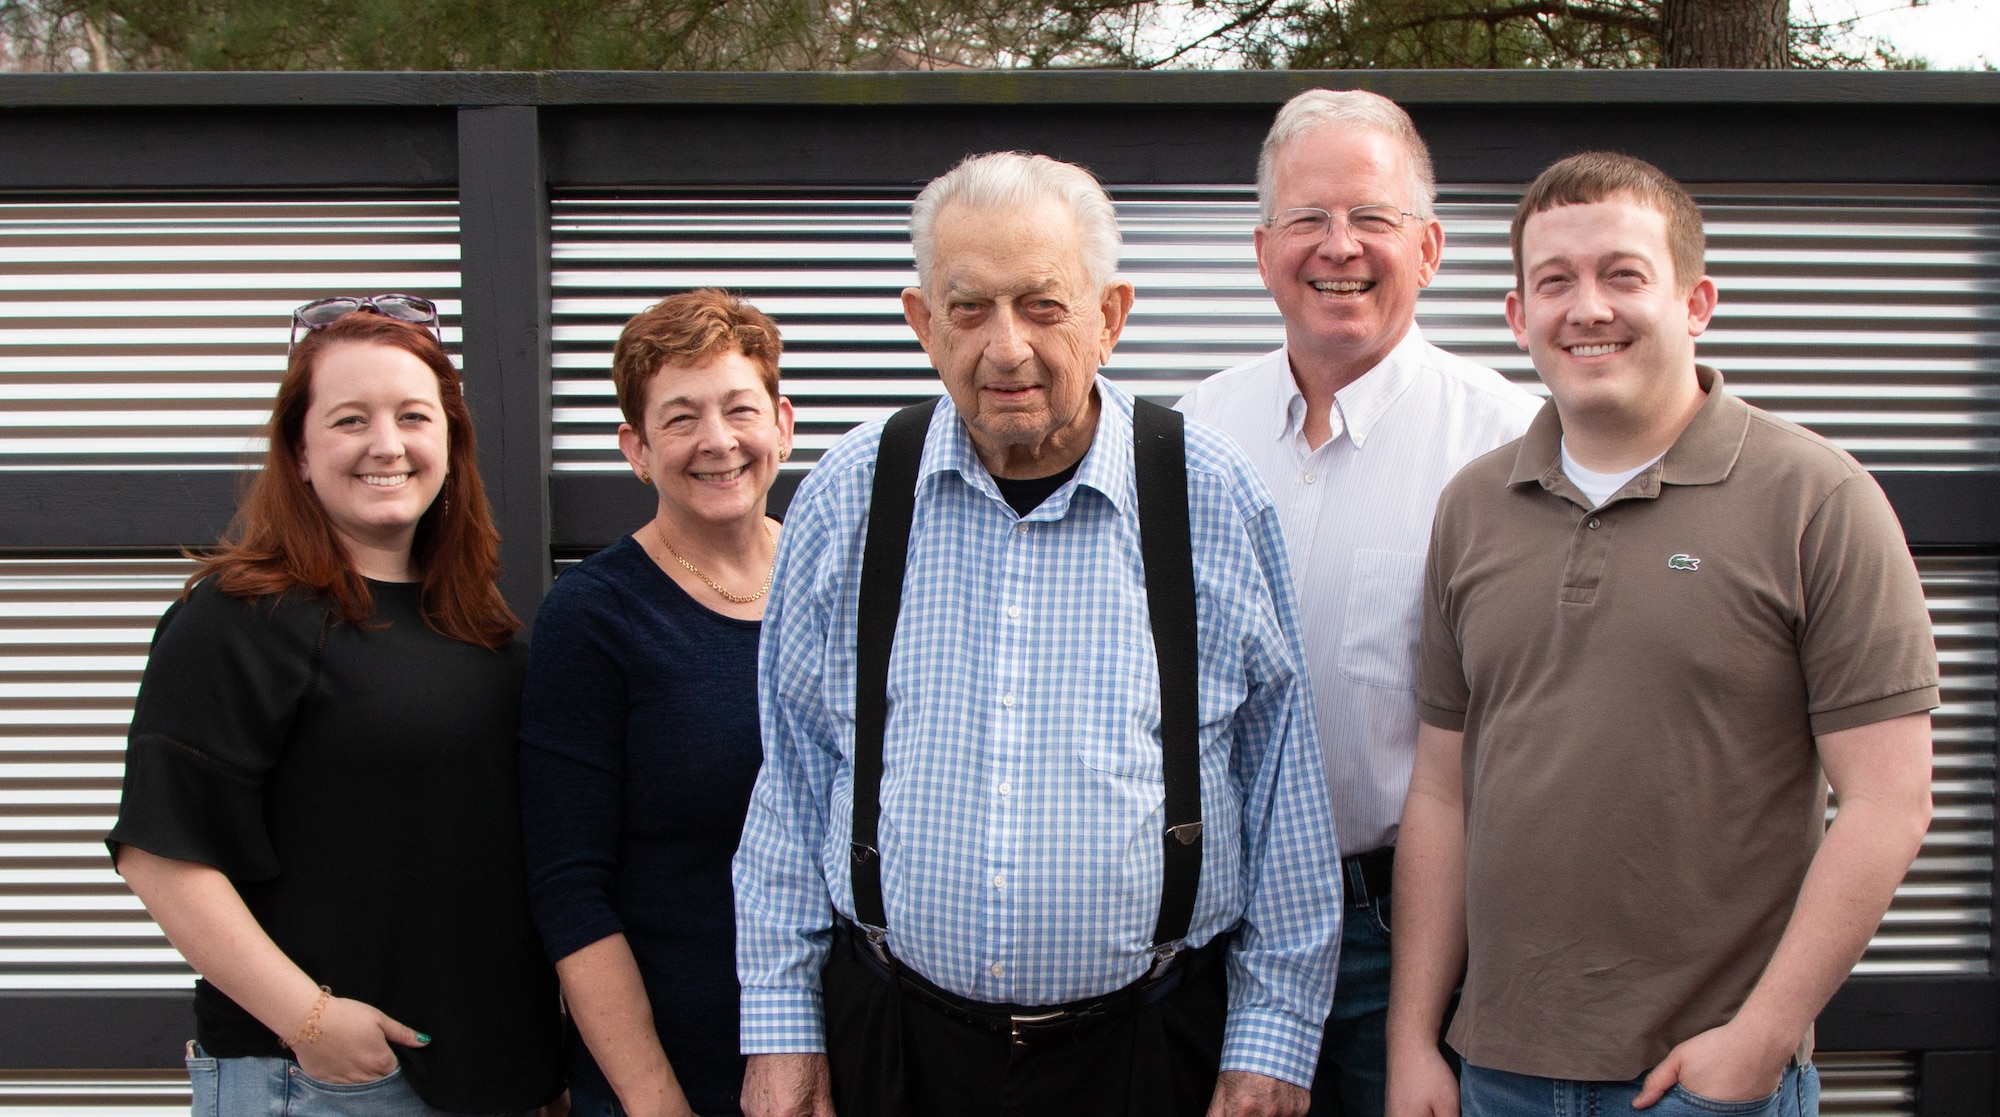 Three generations of the Garrard family have worked at Arnold Air Force Base, beginning with Jim Garrard, center, pictured here in March 2021, with his son, Doug, second from right; daughter-in-law, Angelia, second from left; granddaughter, Rachel; and grandson, Justin. Doug, Angelia, Justin and Rachel all currently work at Arnold Air Force Base. (Courtesy photo)